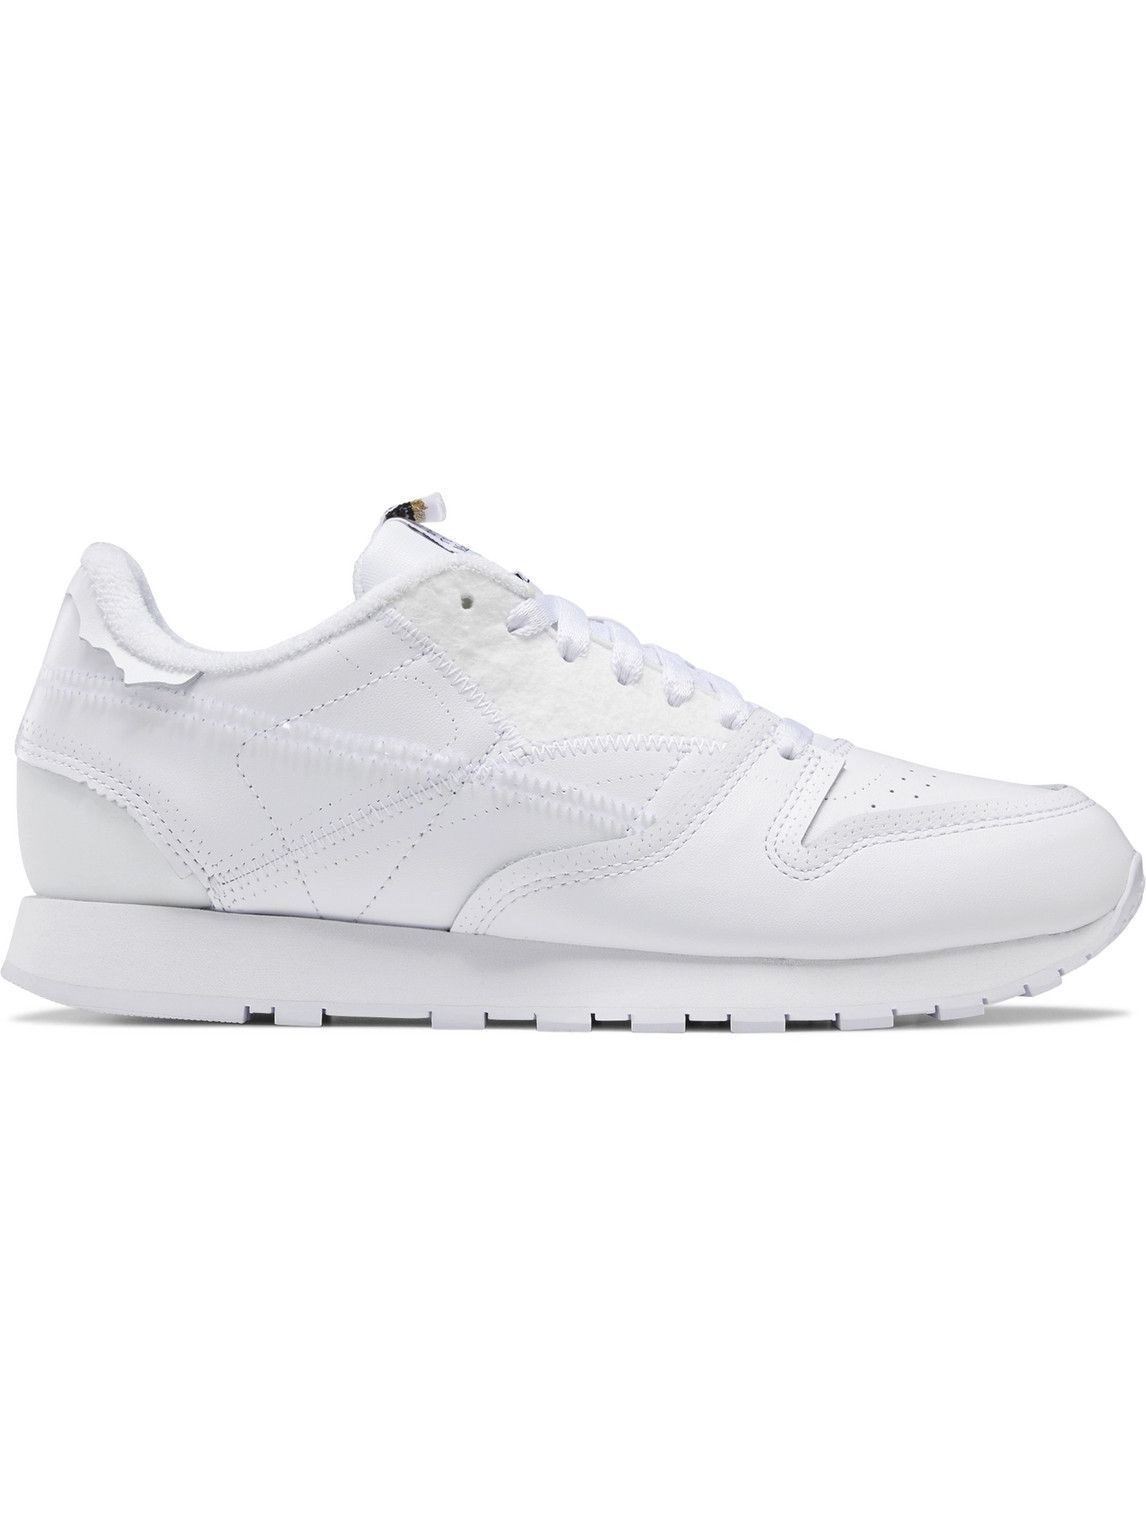 Reebok - Maison Margiela Project 0 Classic Memory Of Leather Sneakers ...